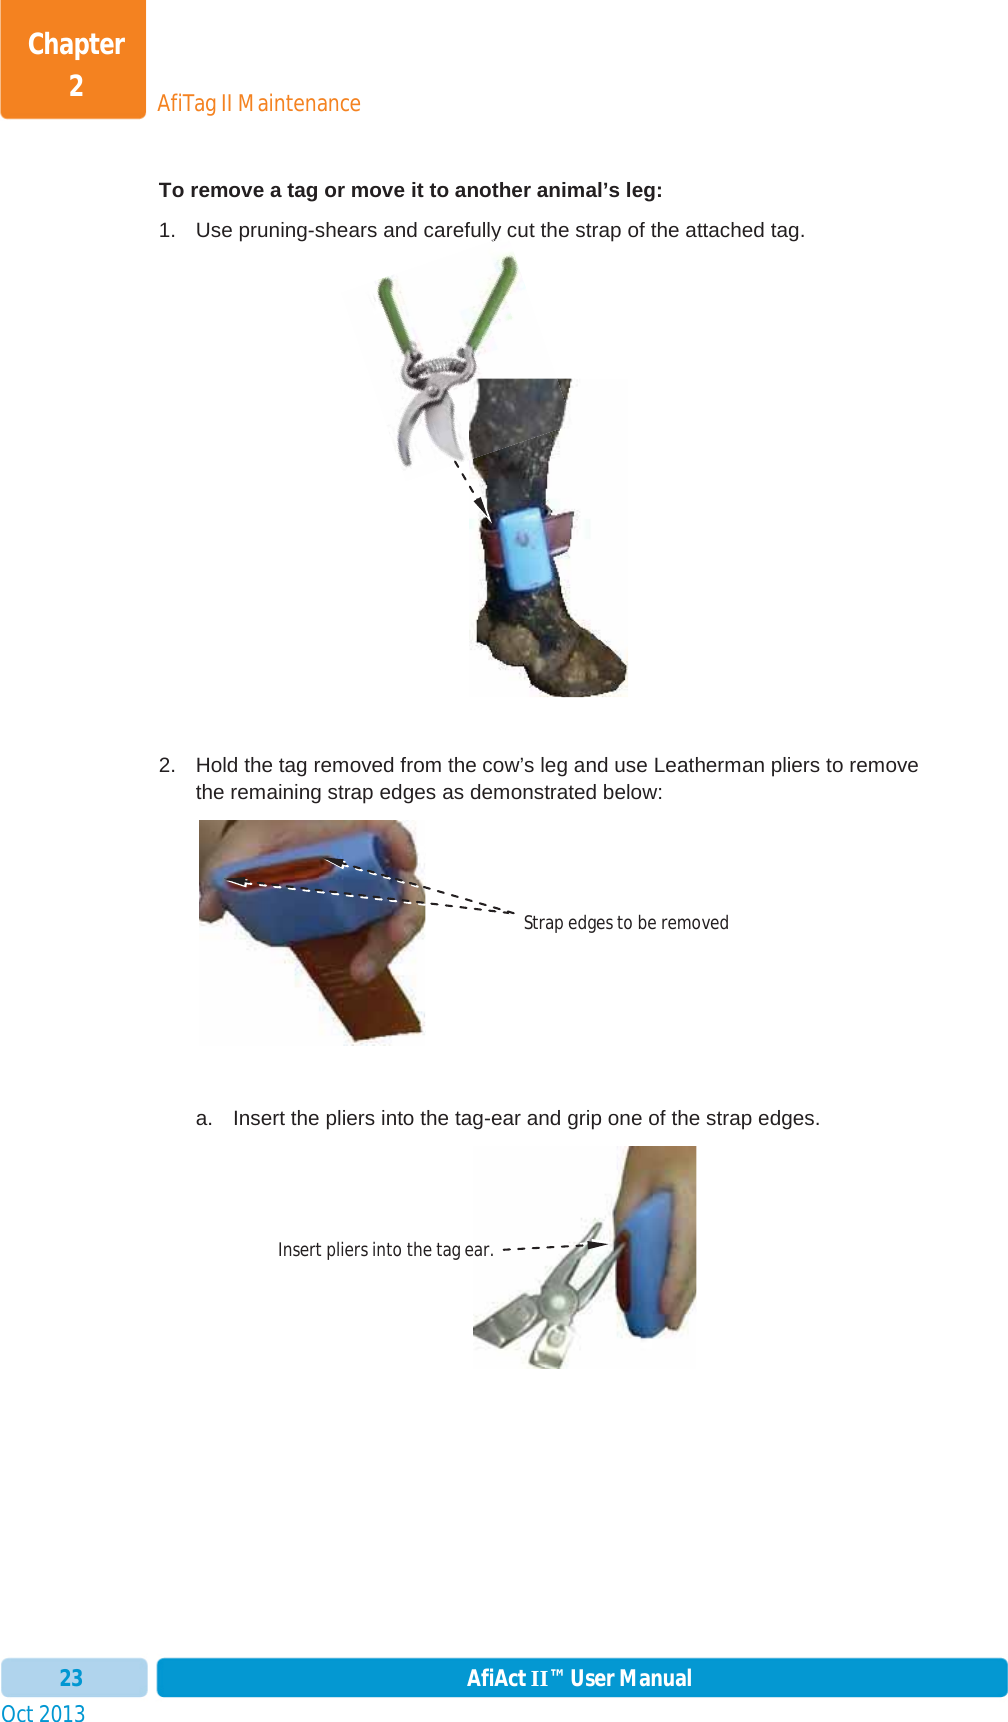 Oct 2013 AfiAct II™ User Manual23AfiTag II MaintenanceChapter 2To remove a tag or move it to another animal’s leg: 1.  Use pruning-shears and carefully cut the strap of the attached tag. 2.  Hold the tag removed from the cow’s leg and use Leatherman pliers to remove the remaining strap edges as demonstrated below:        a.  Insert the pliers into the tag-ear and grip one of the strap edges. ycStrap edges to be removed Insert pliers into the tag ear. 